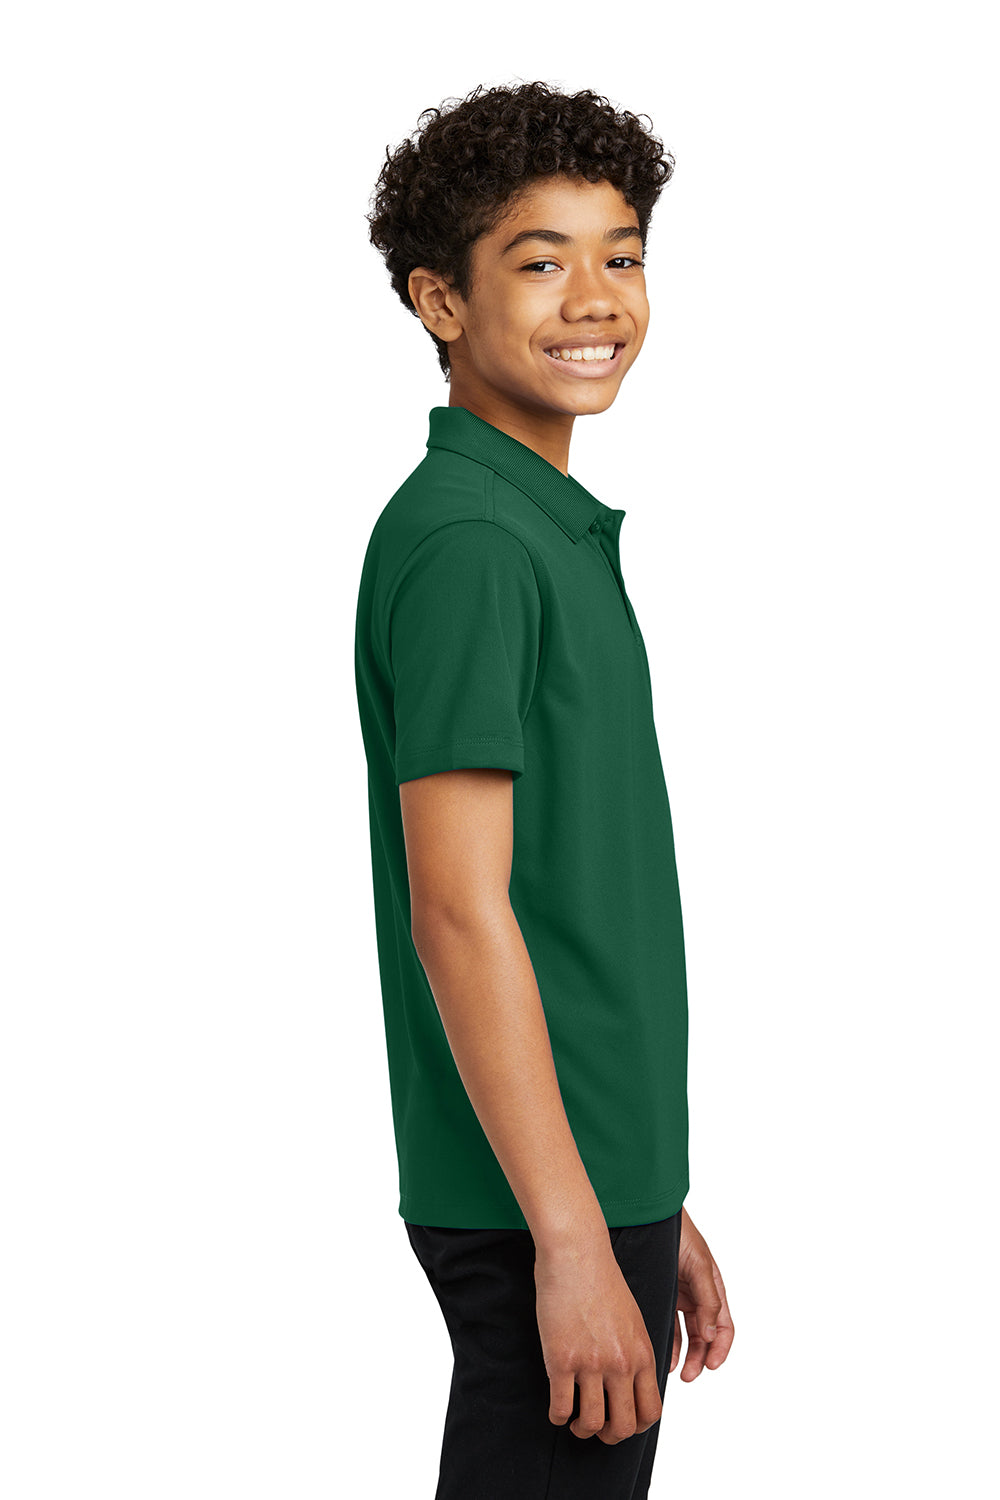 Port Authority Y110 Youth Dry Zone Moisture Wicking Short Sleeve Polo Shirt Deep Forest Green Side